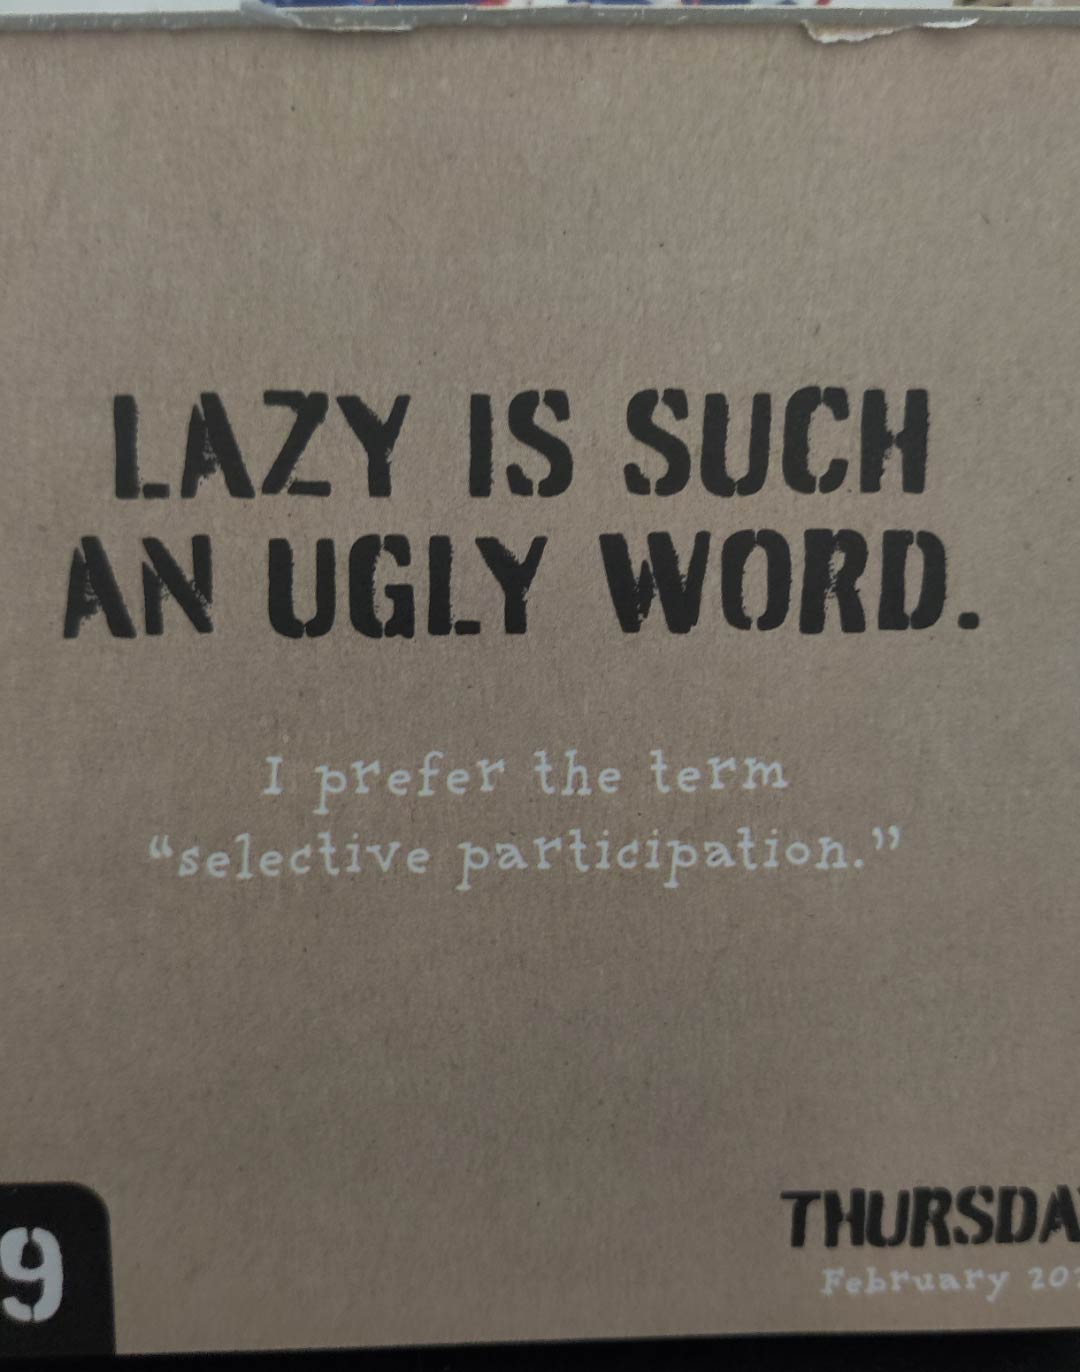 Lazy is such an ugly word